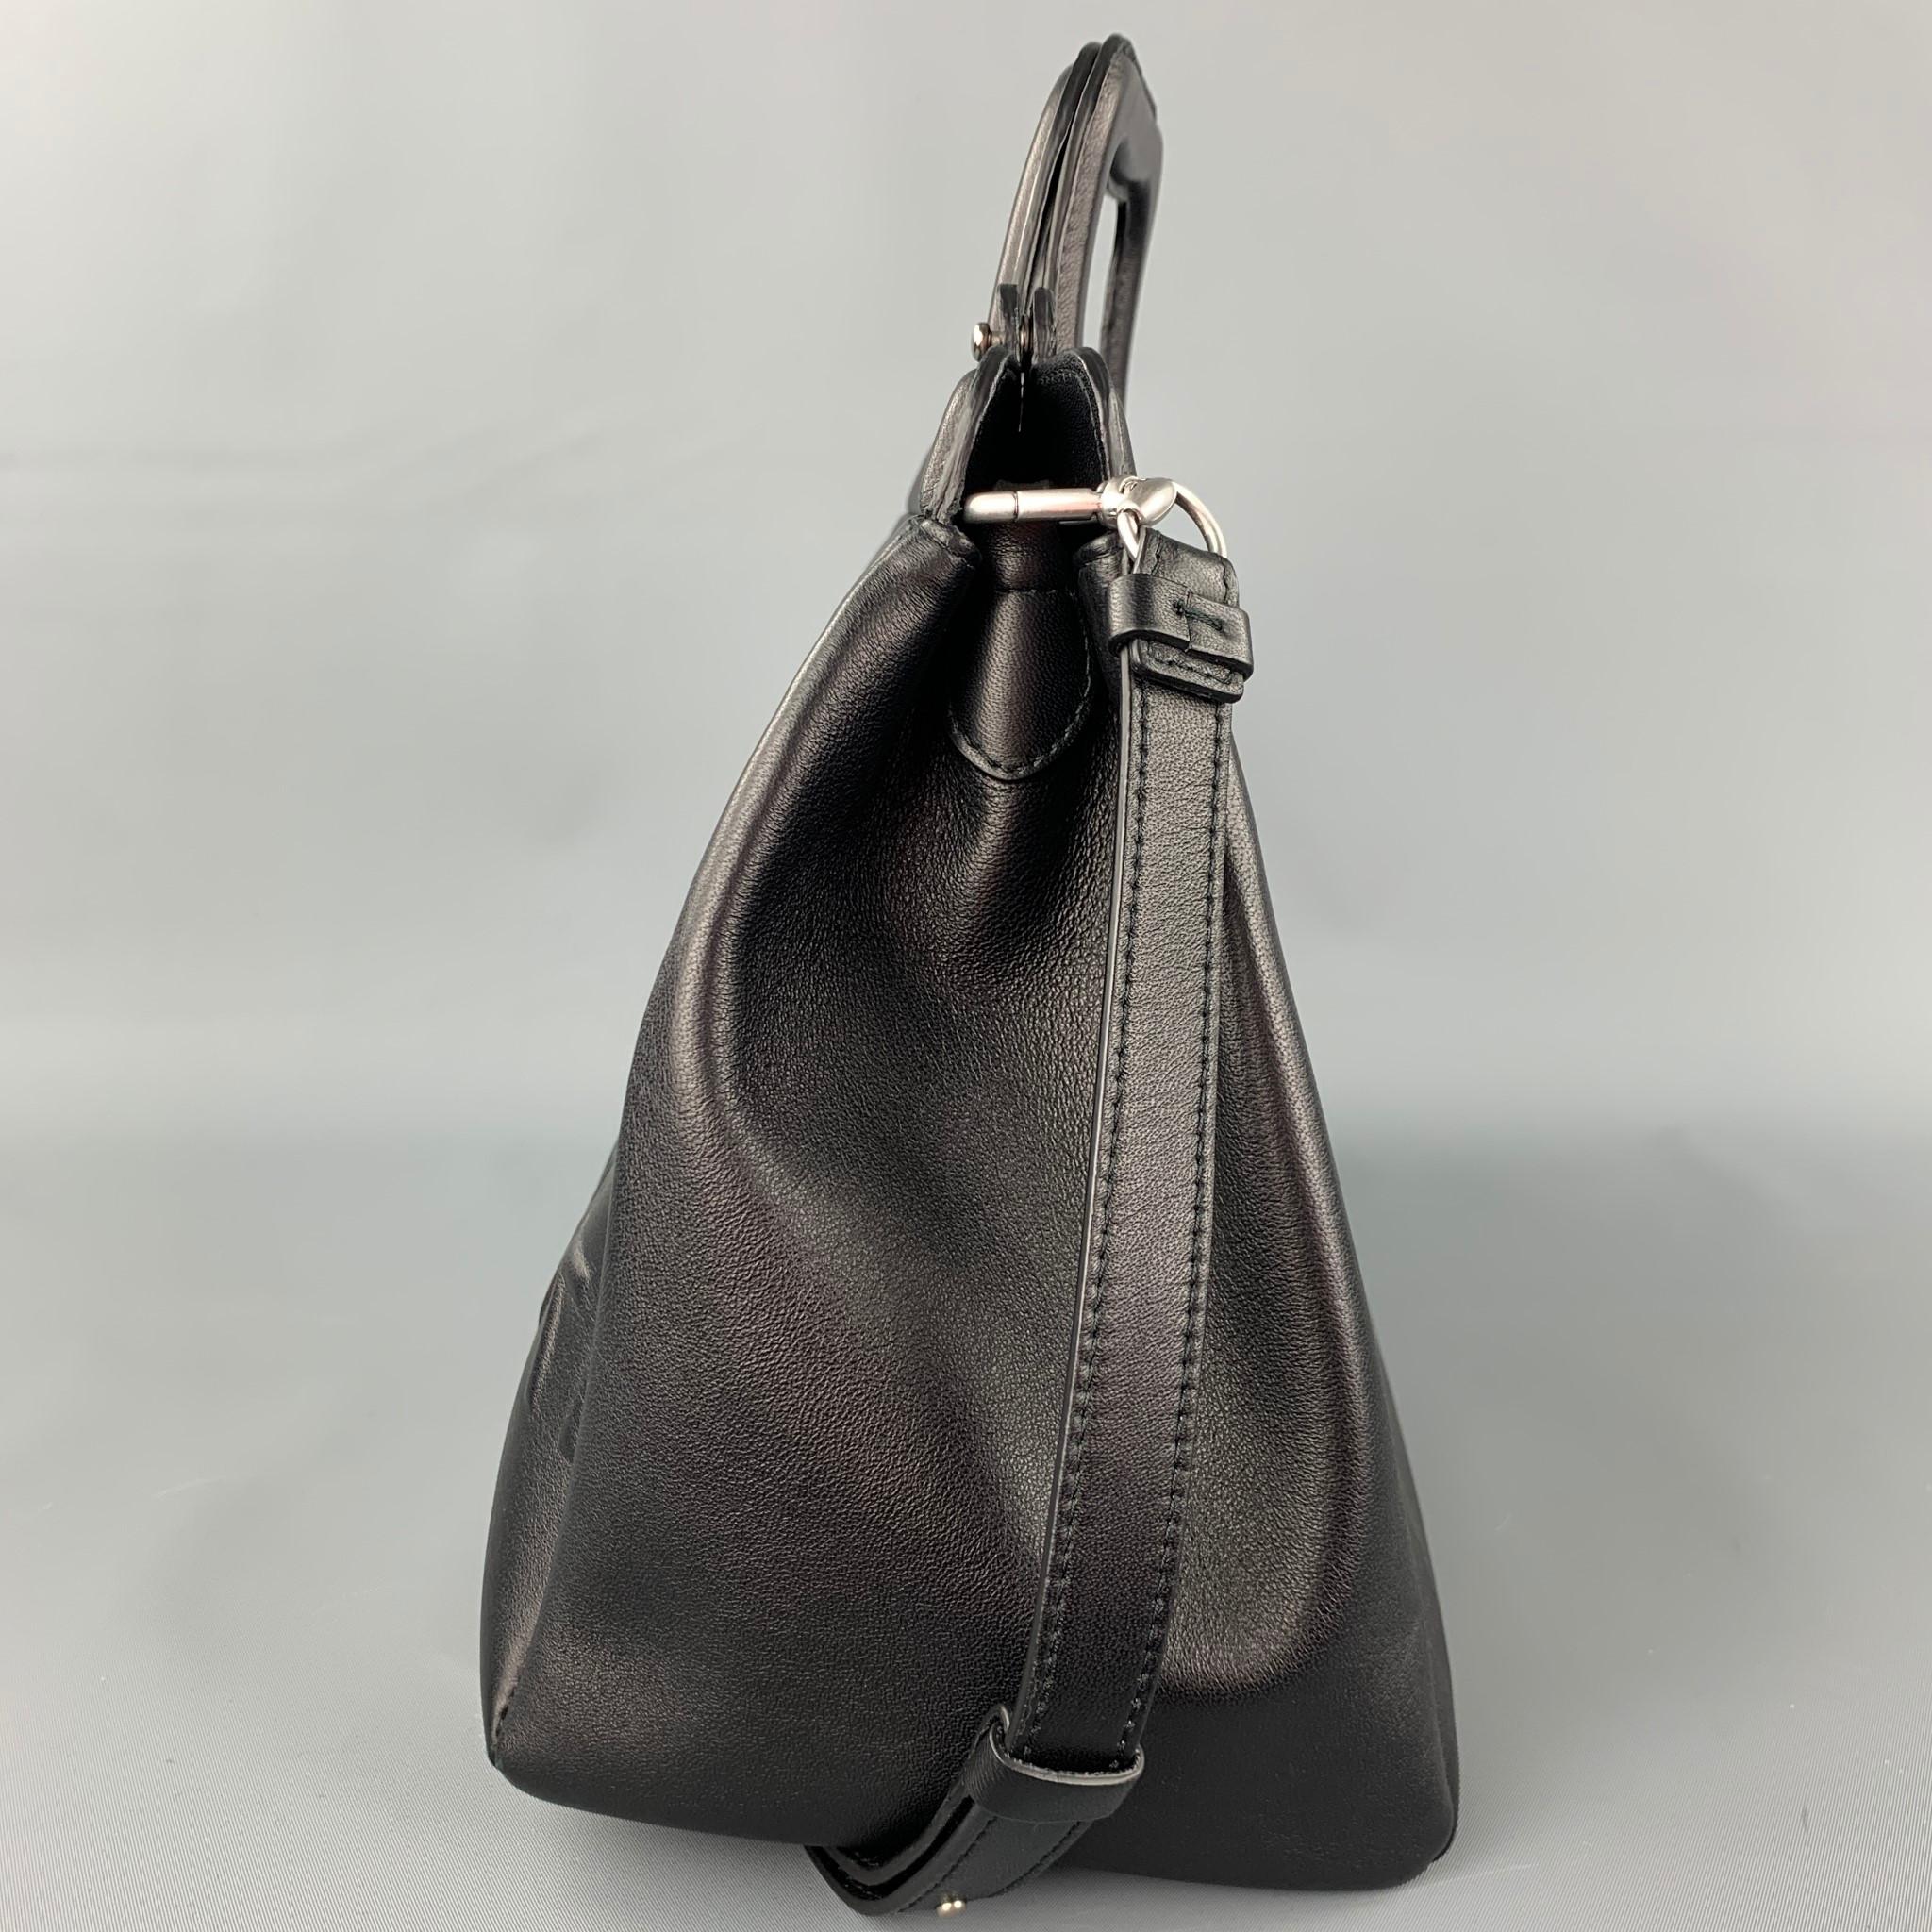 MAISON MARGIELA bag comes in a black leather with a embossed number logo design featuring a shoulder strap, double slots, and a stud button closure.

Excellent Pre-Owned Condition.
Original Retail Price: $1,990.00

Measurements:

Length: 15